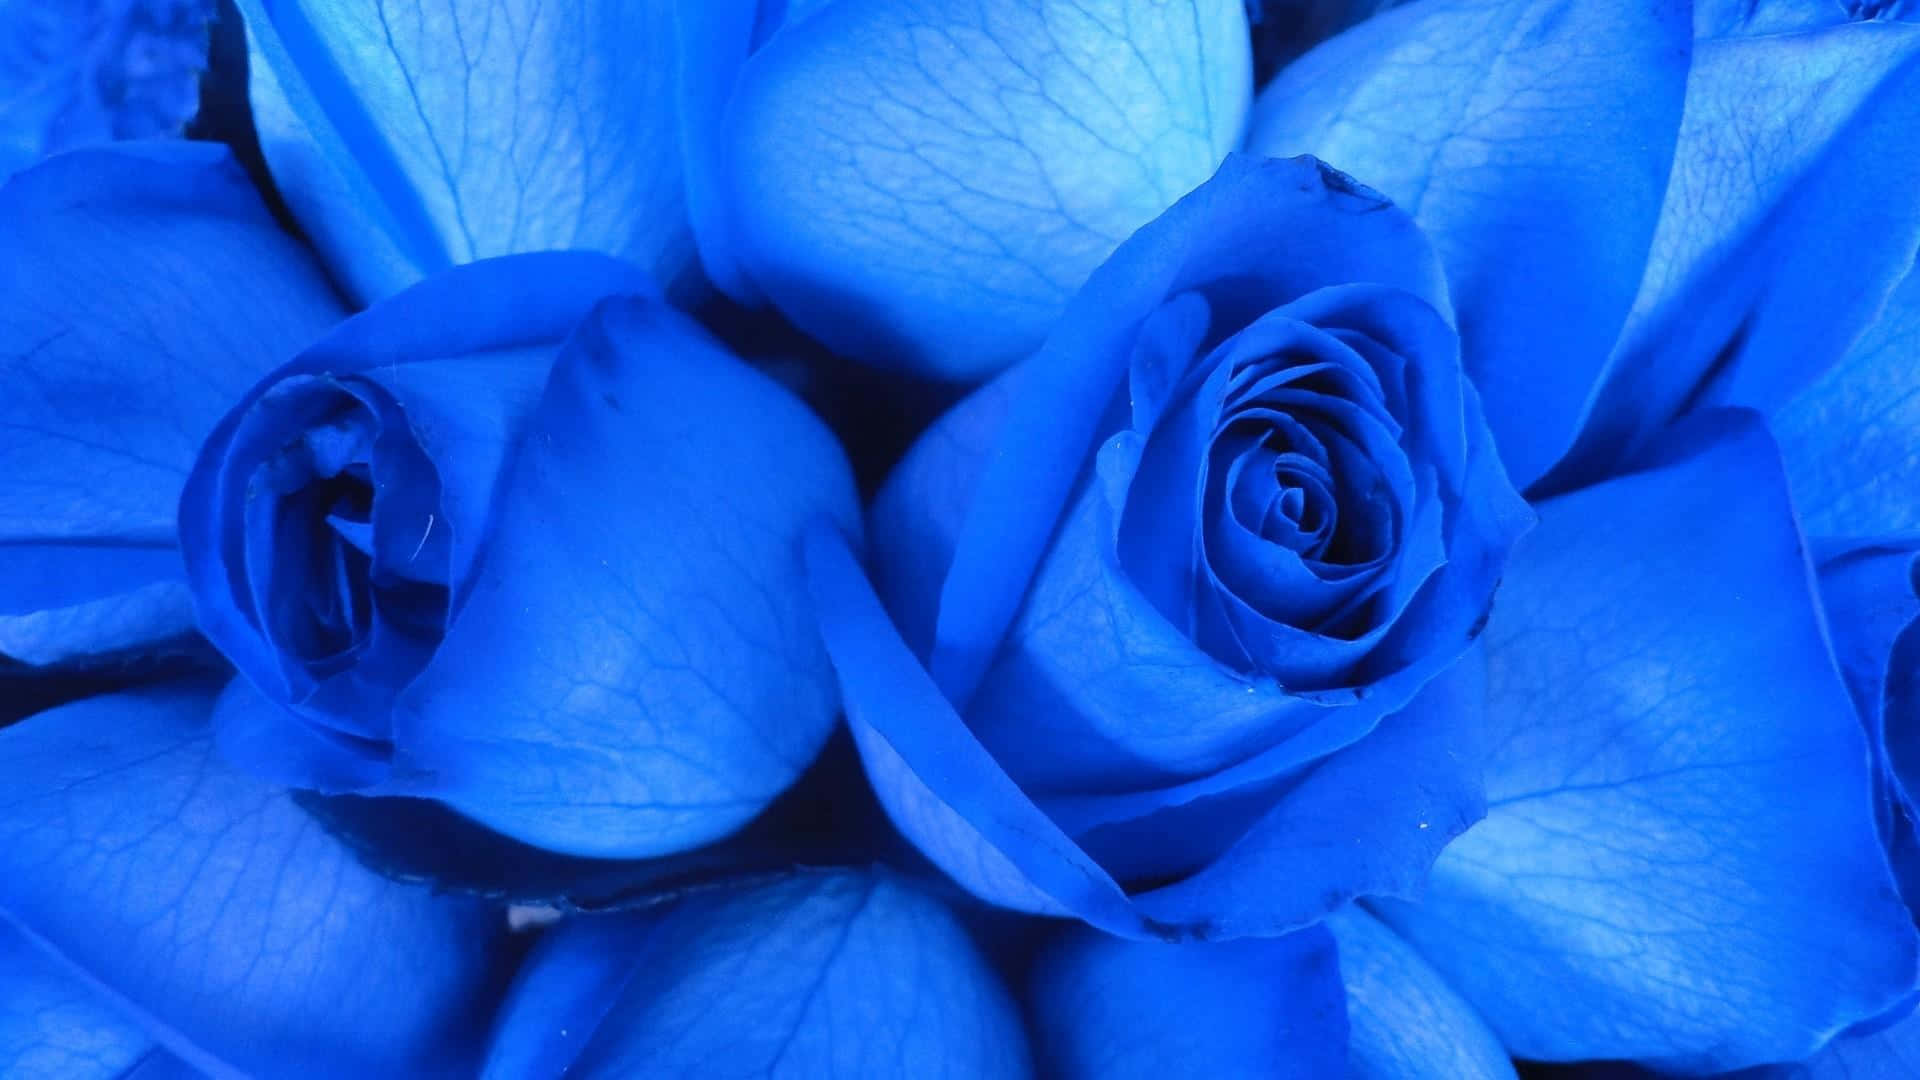 Get lost in a dreamlike world with the beauty of a Blue Rose Wallpaper